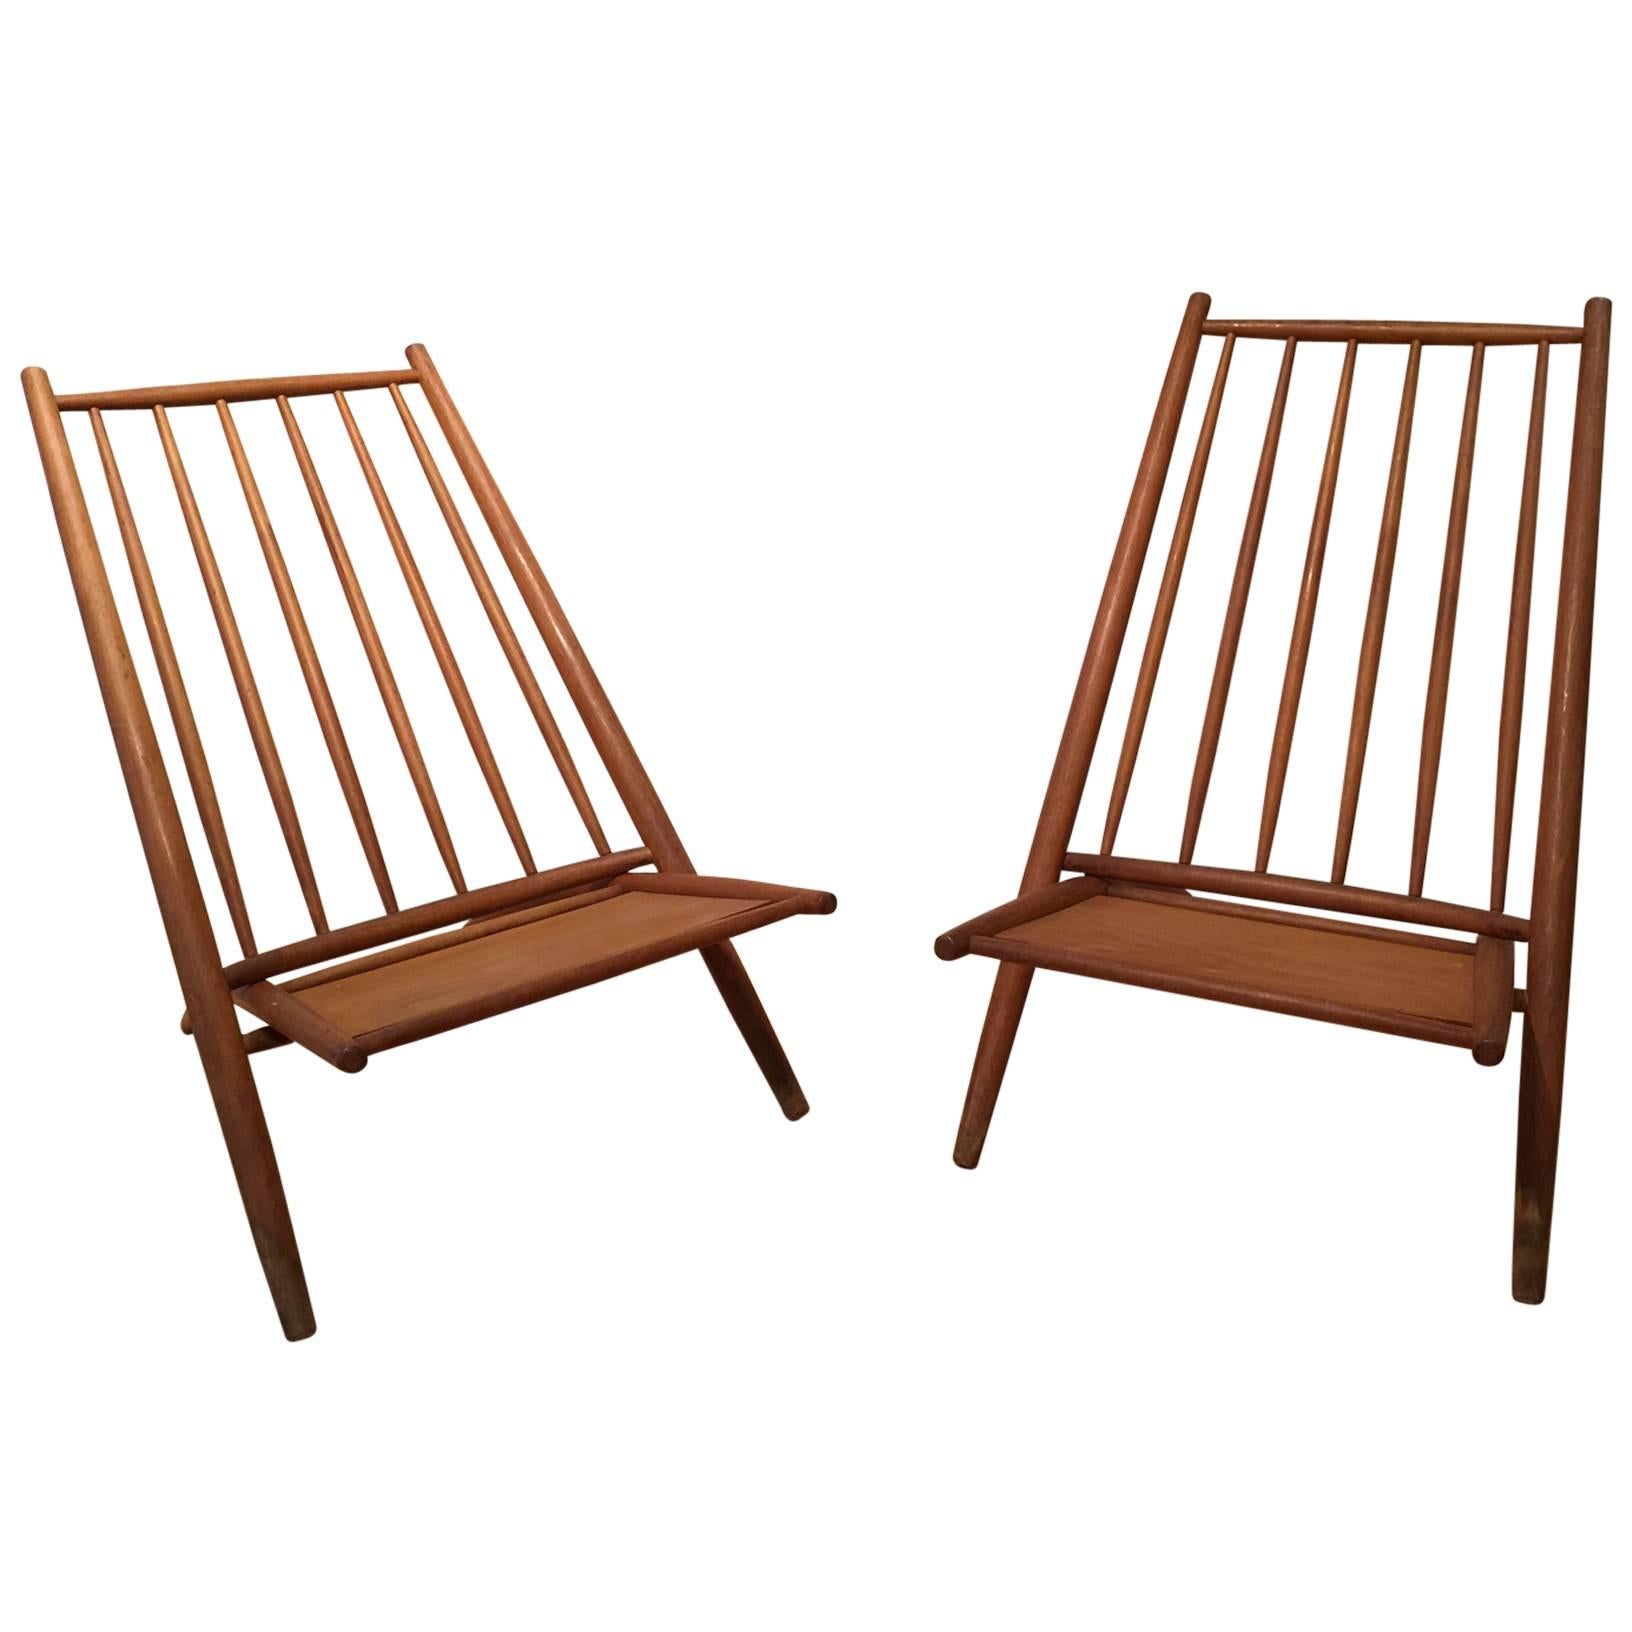 Pair of Congo Chairs by Alf Svensson, Haga Fors, Sweden, 1954